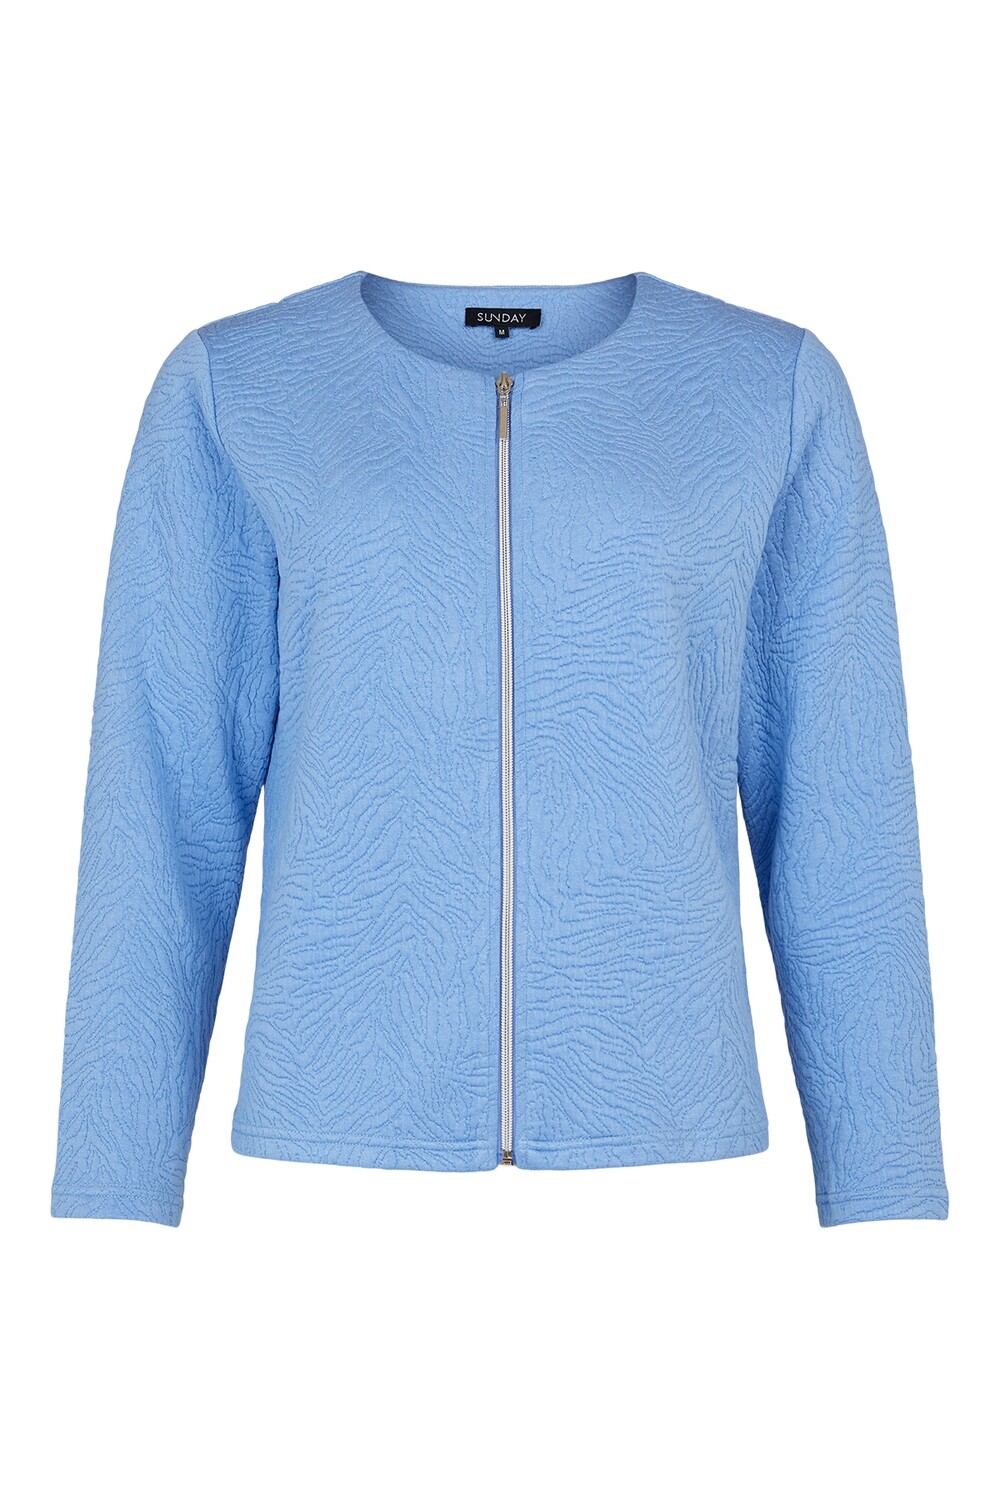 Periwinkle Lightly Quilted Top/Cardi/Jacket